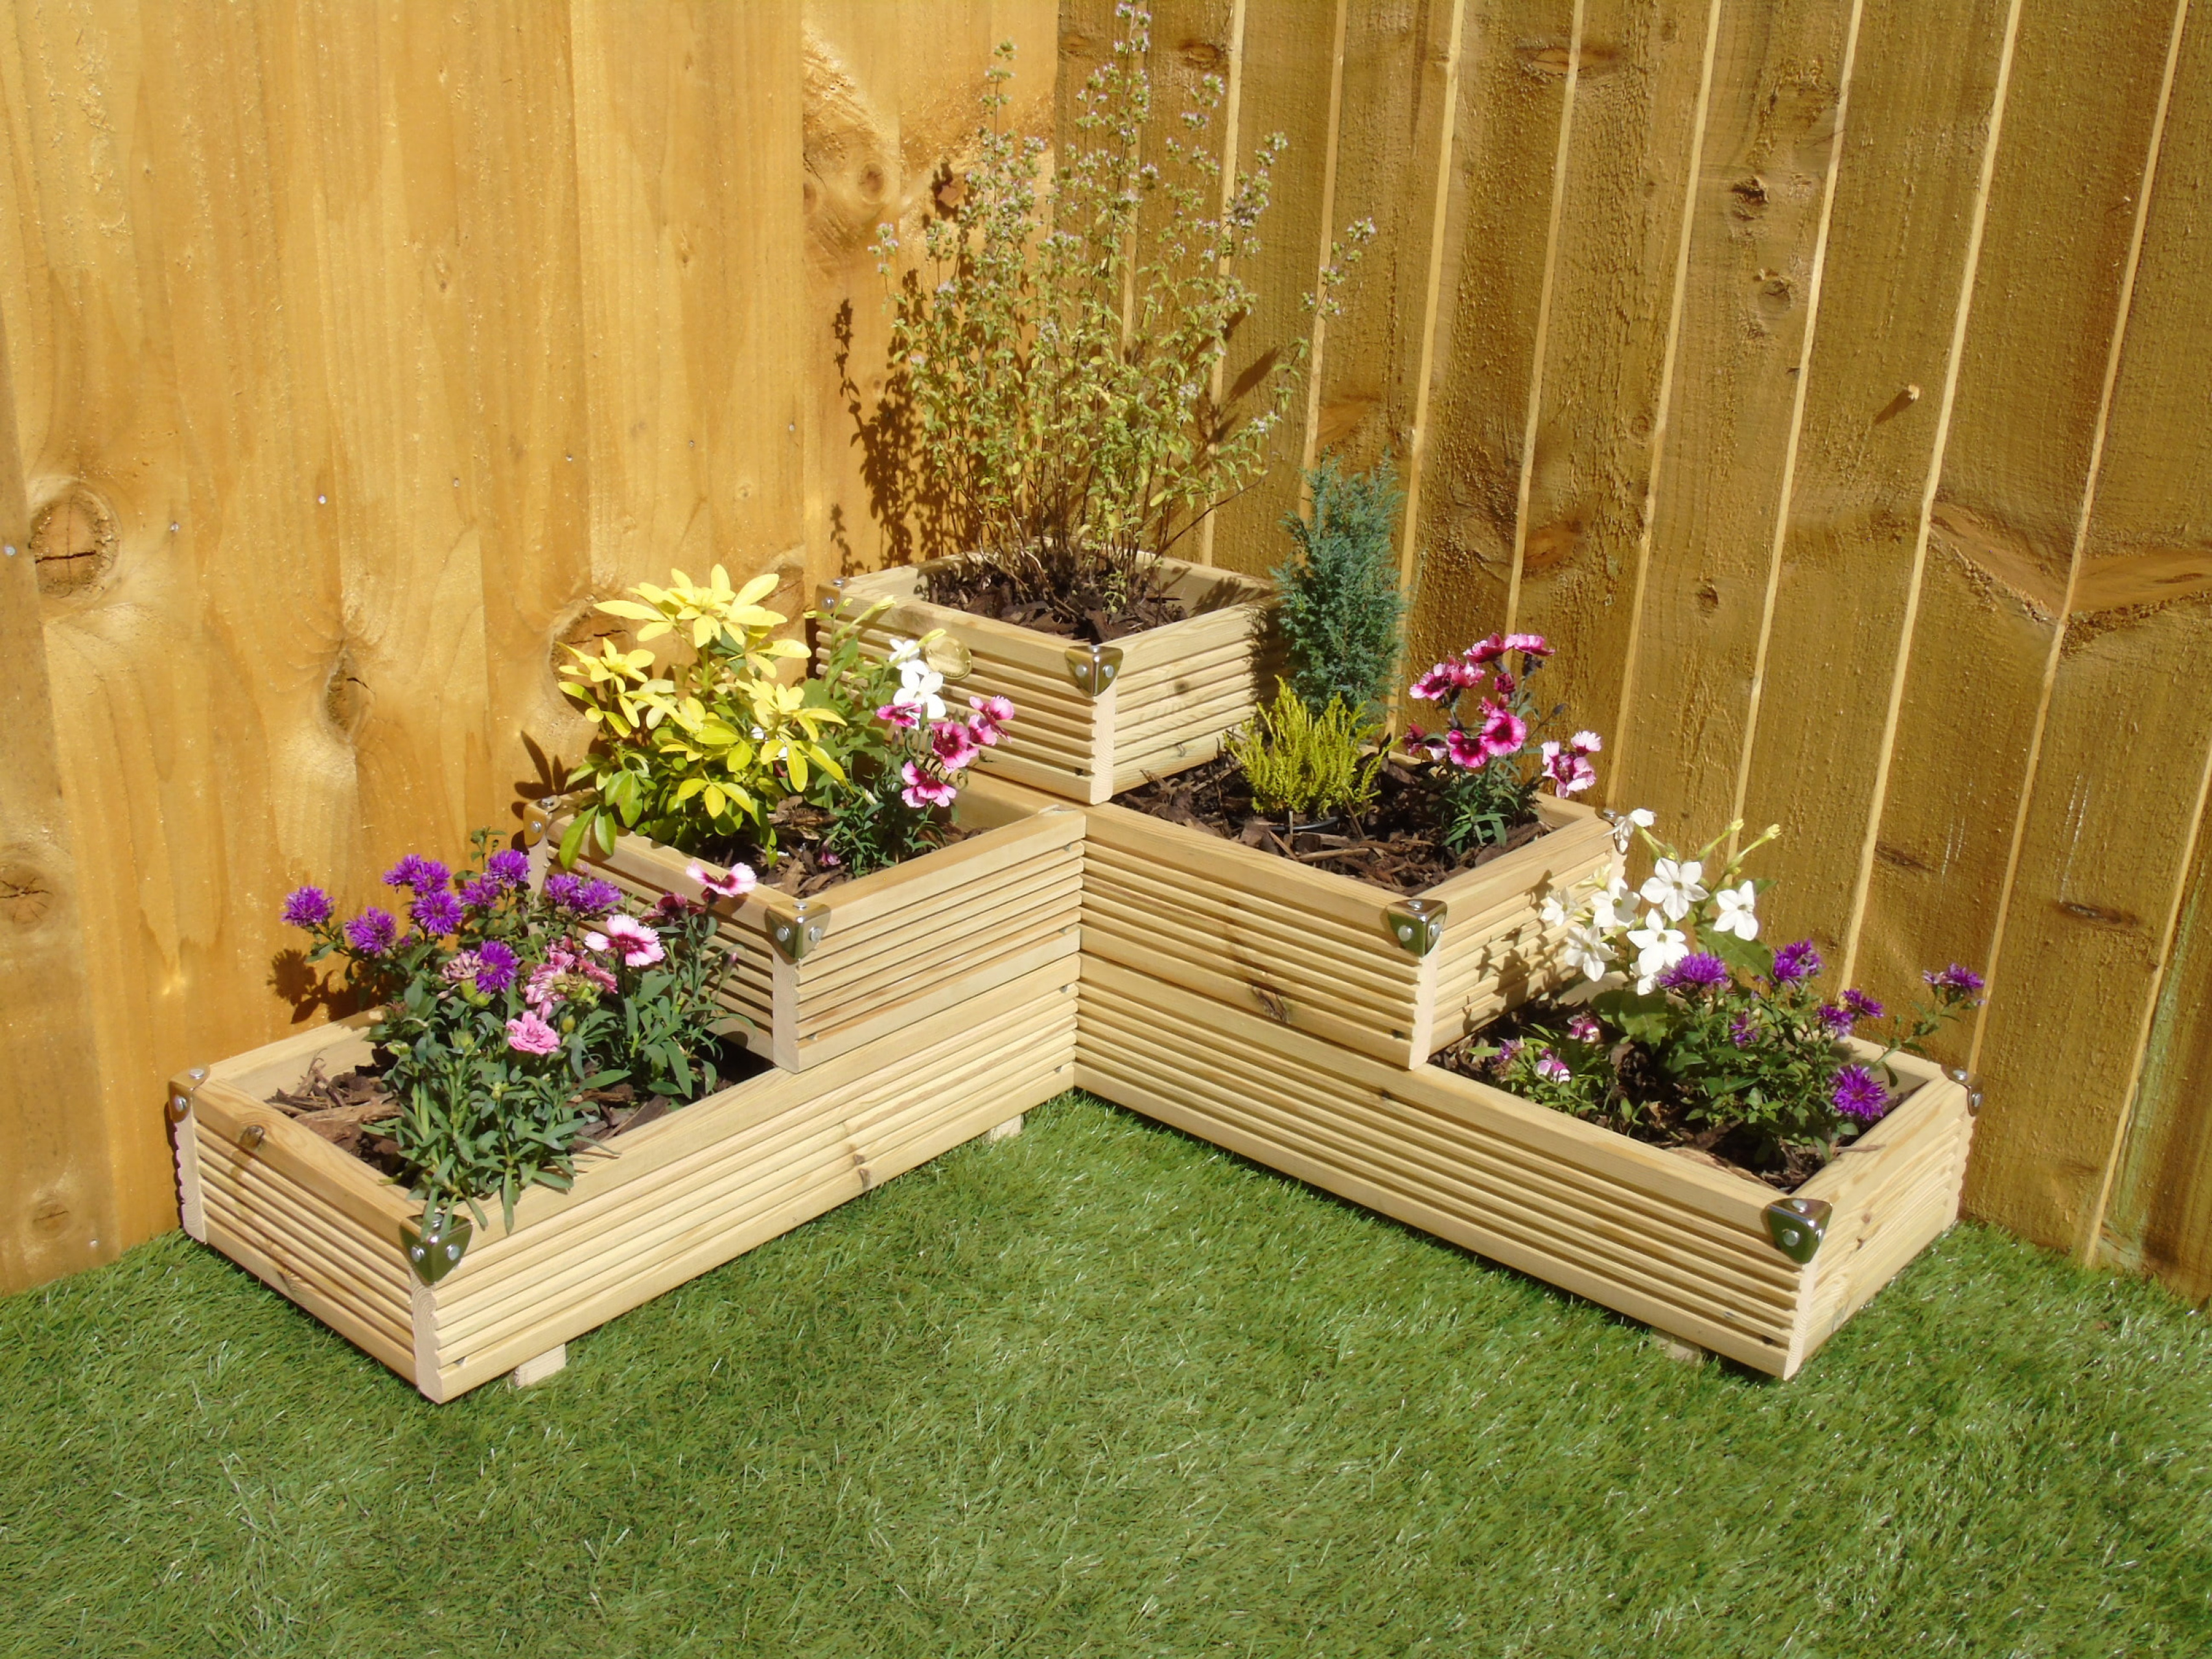 Product Of The Week A Beautiful Modern 2 Tier Planter | Inspiring Home ...